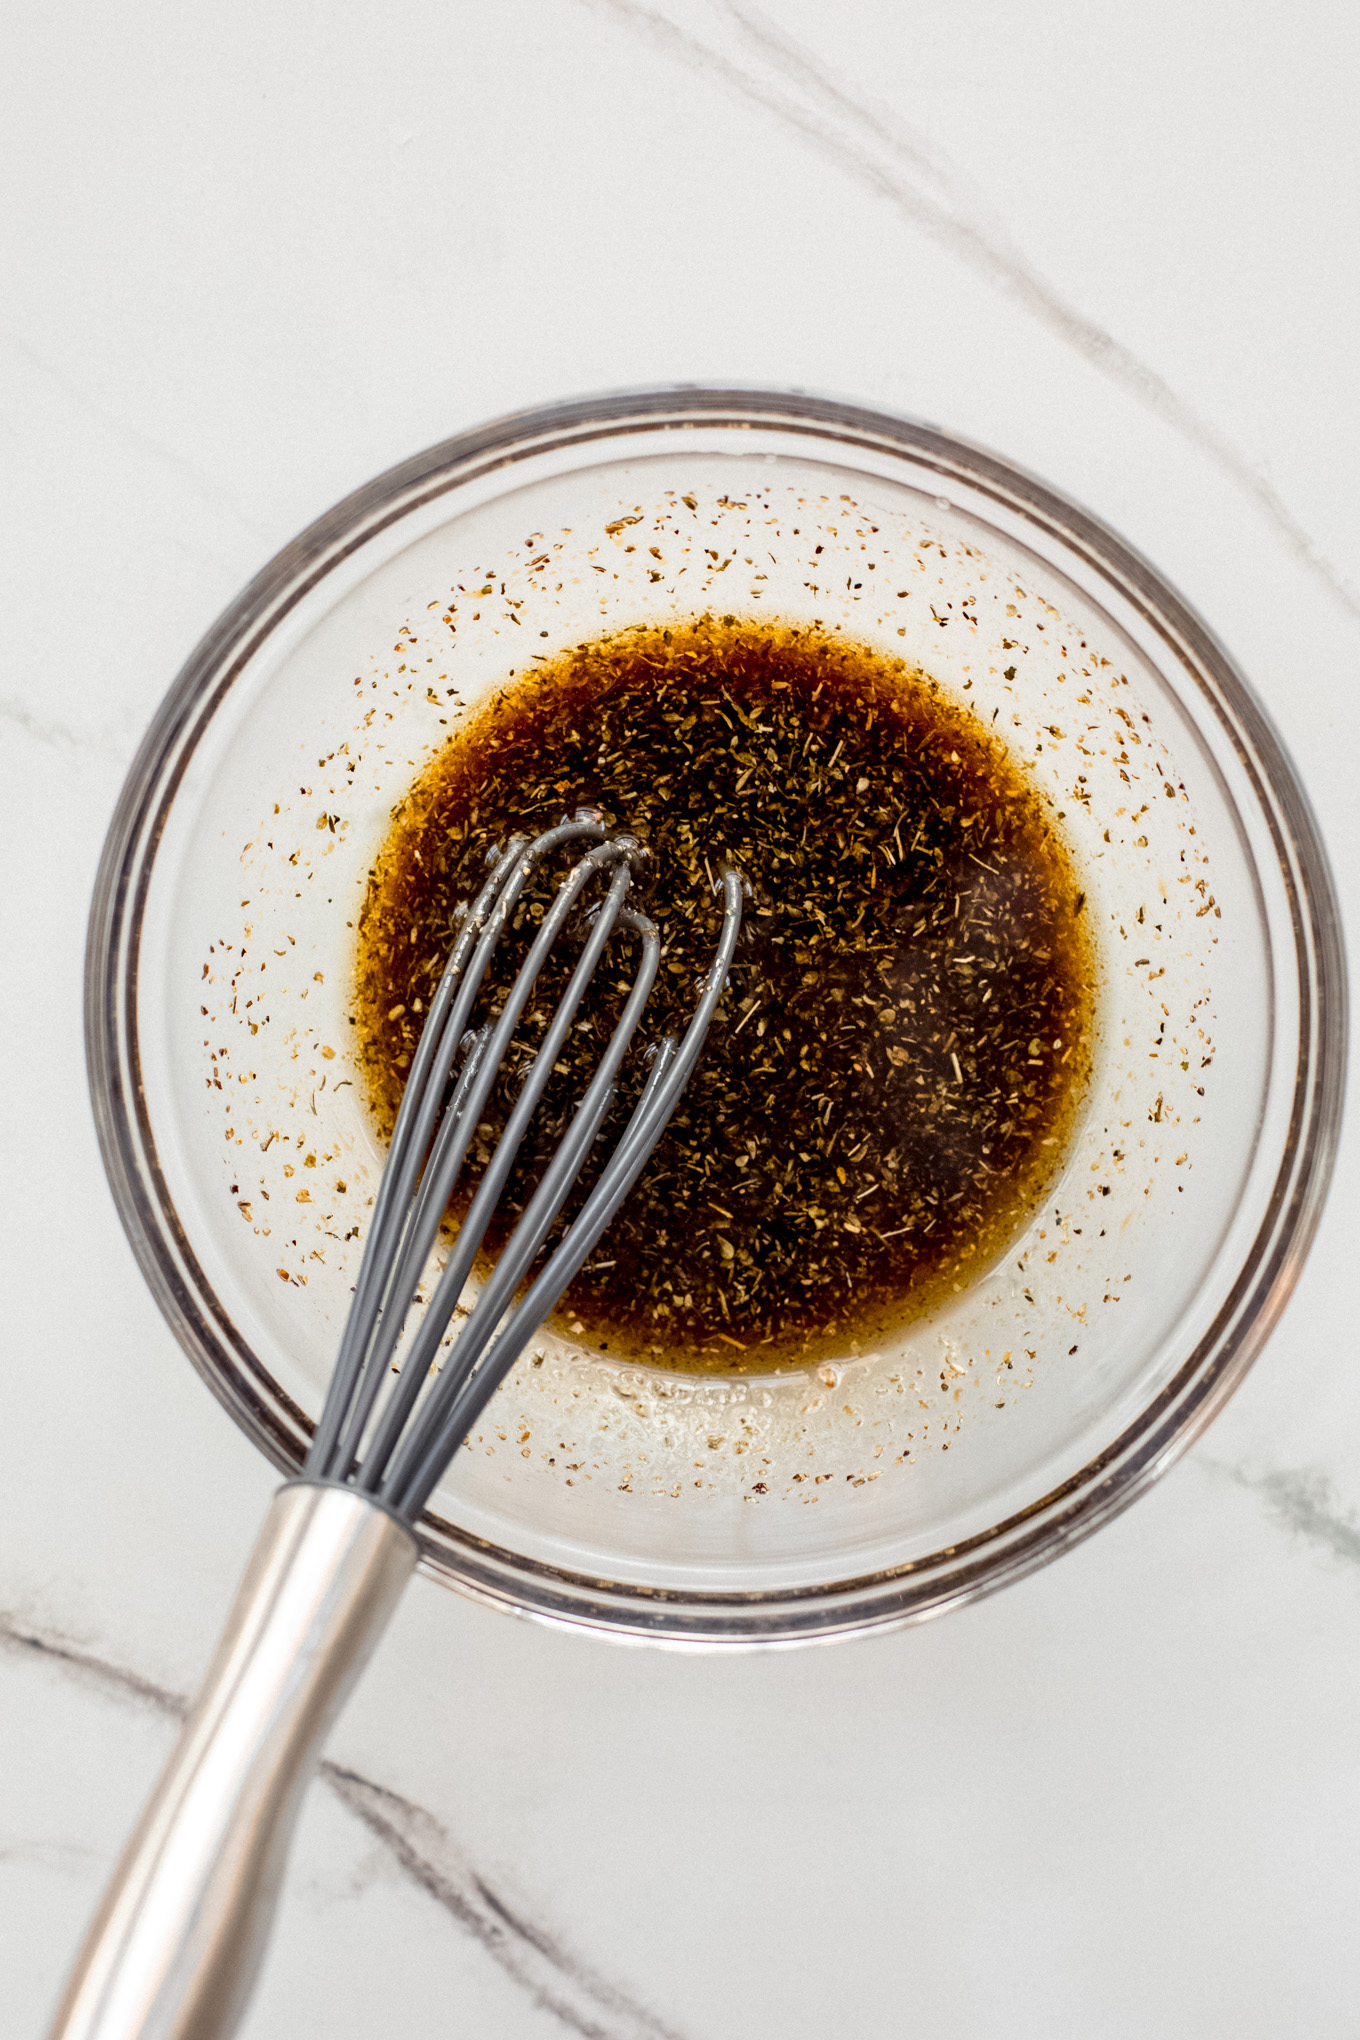 balsamic vinegar and oil in a bowl with a whisk.